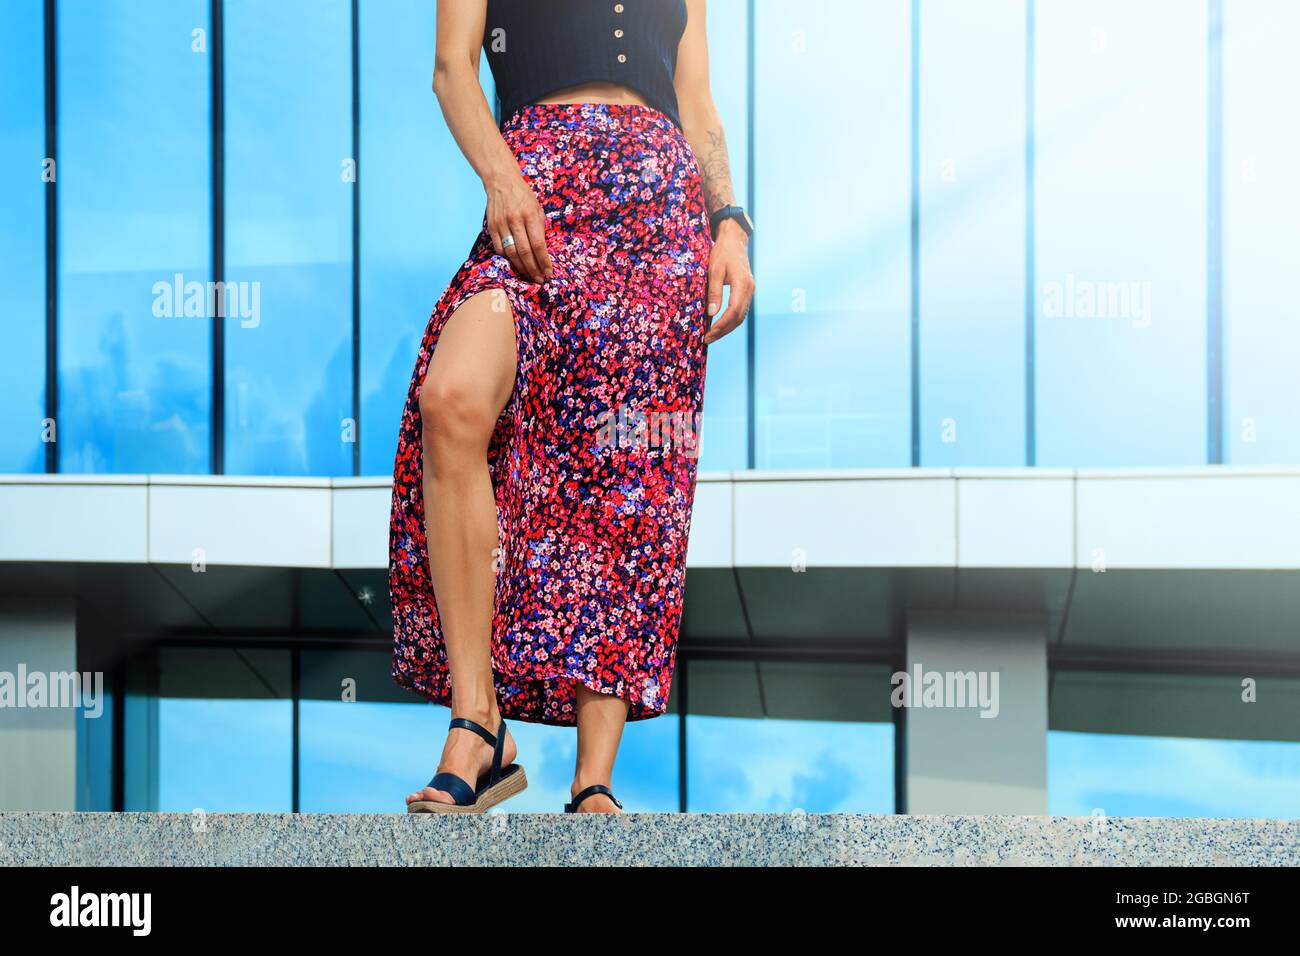 Woman Wearing Skirt and Blue Flip Flops Stock Photo - Image of